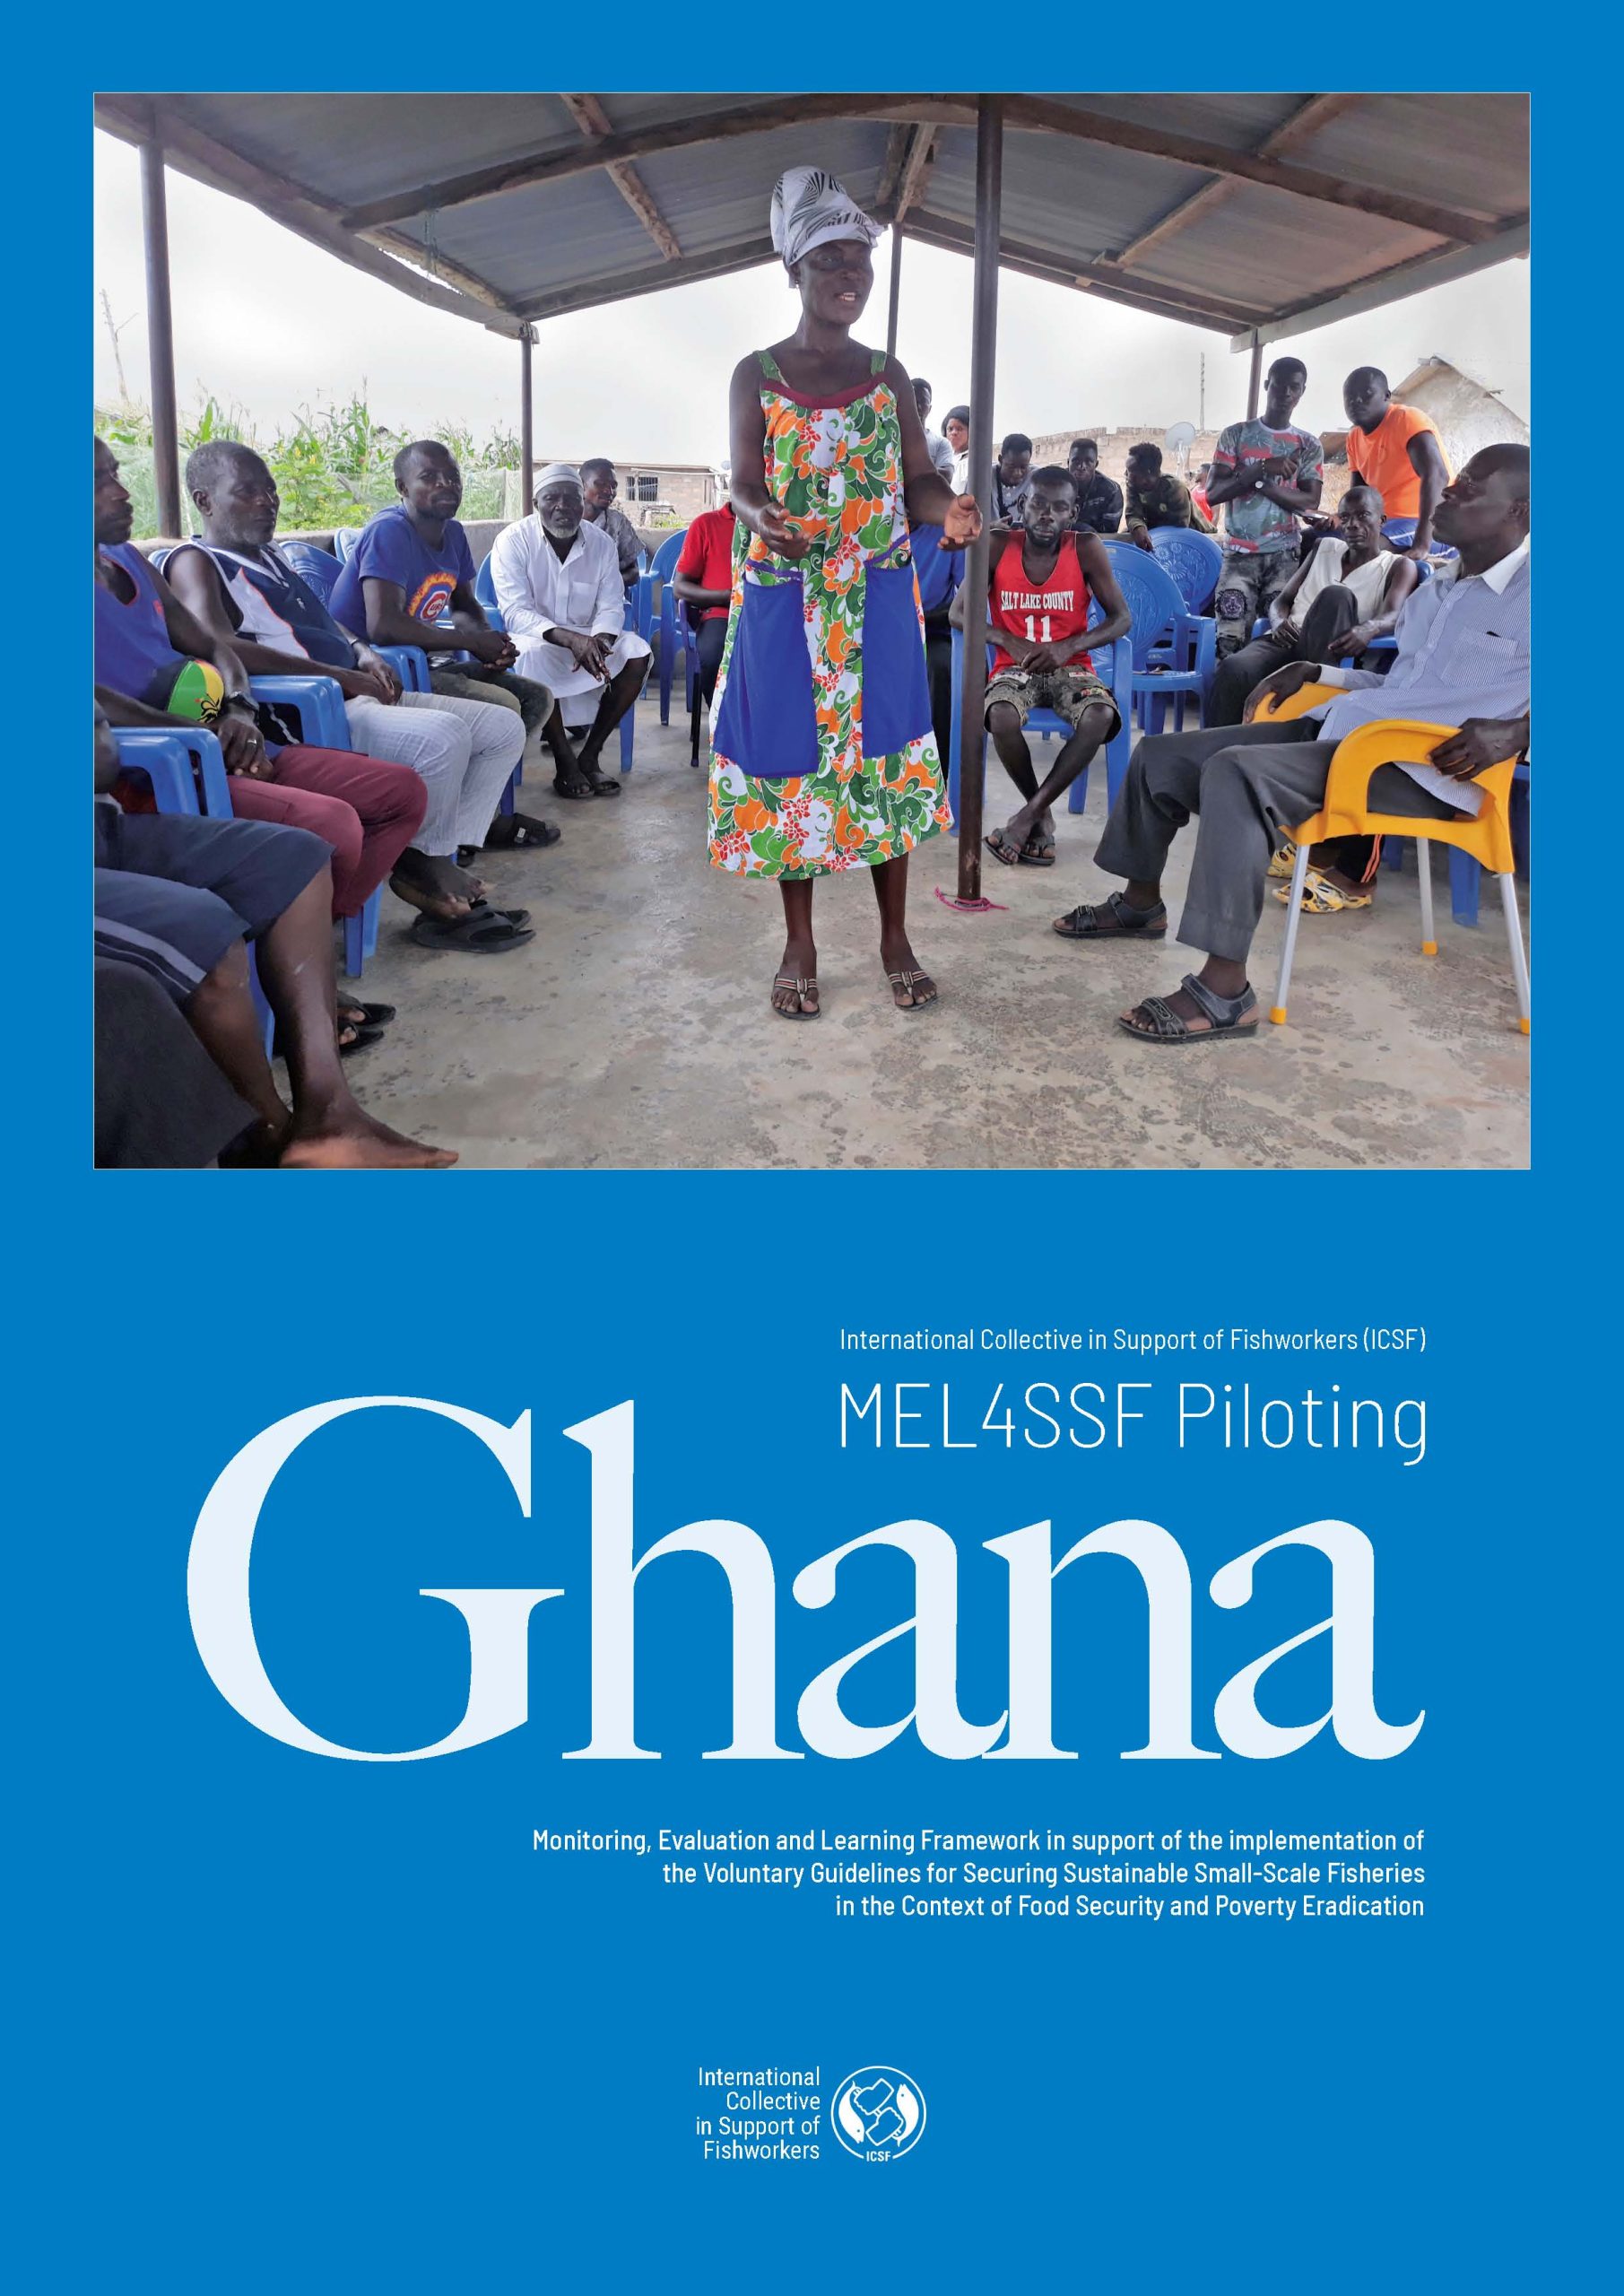 MEL4SSF Piloting Ghana: Monitoring, Evaluation and Learning Framework in support of the implementation of the Voluntary Guidelines for Securing Sustainable Small-Scale Fisheries in the Context of Food Security and Poverty Eradication by Peter Linford Adjei and ICSF